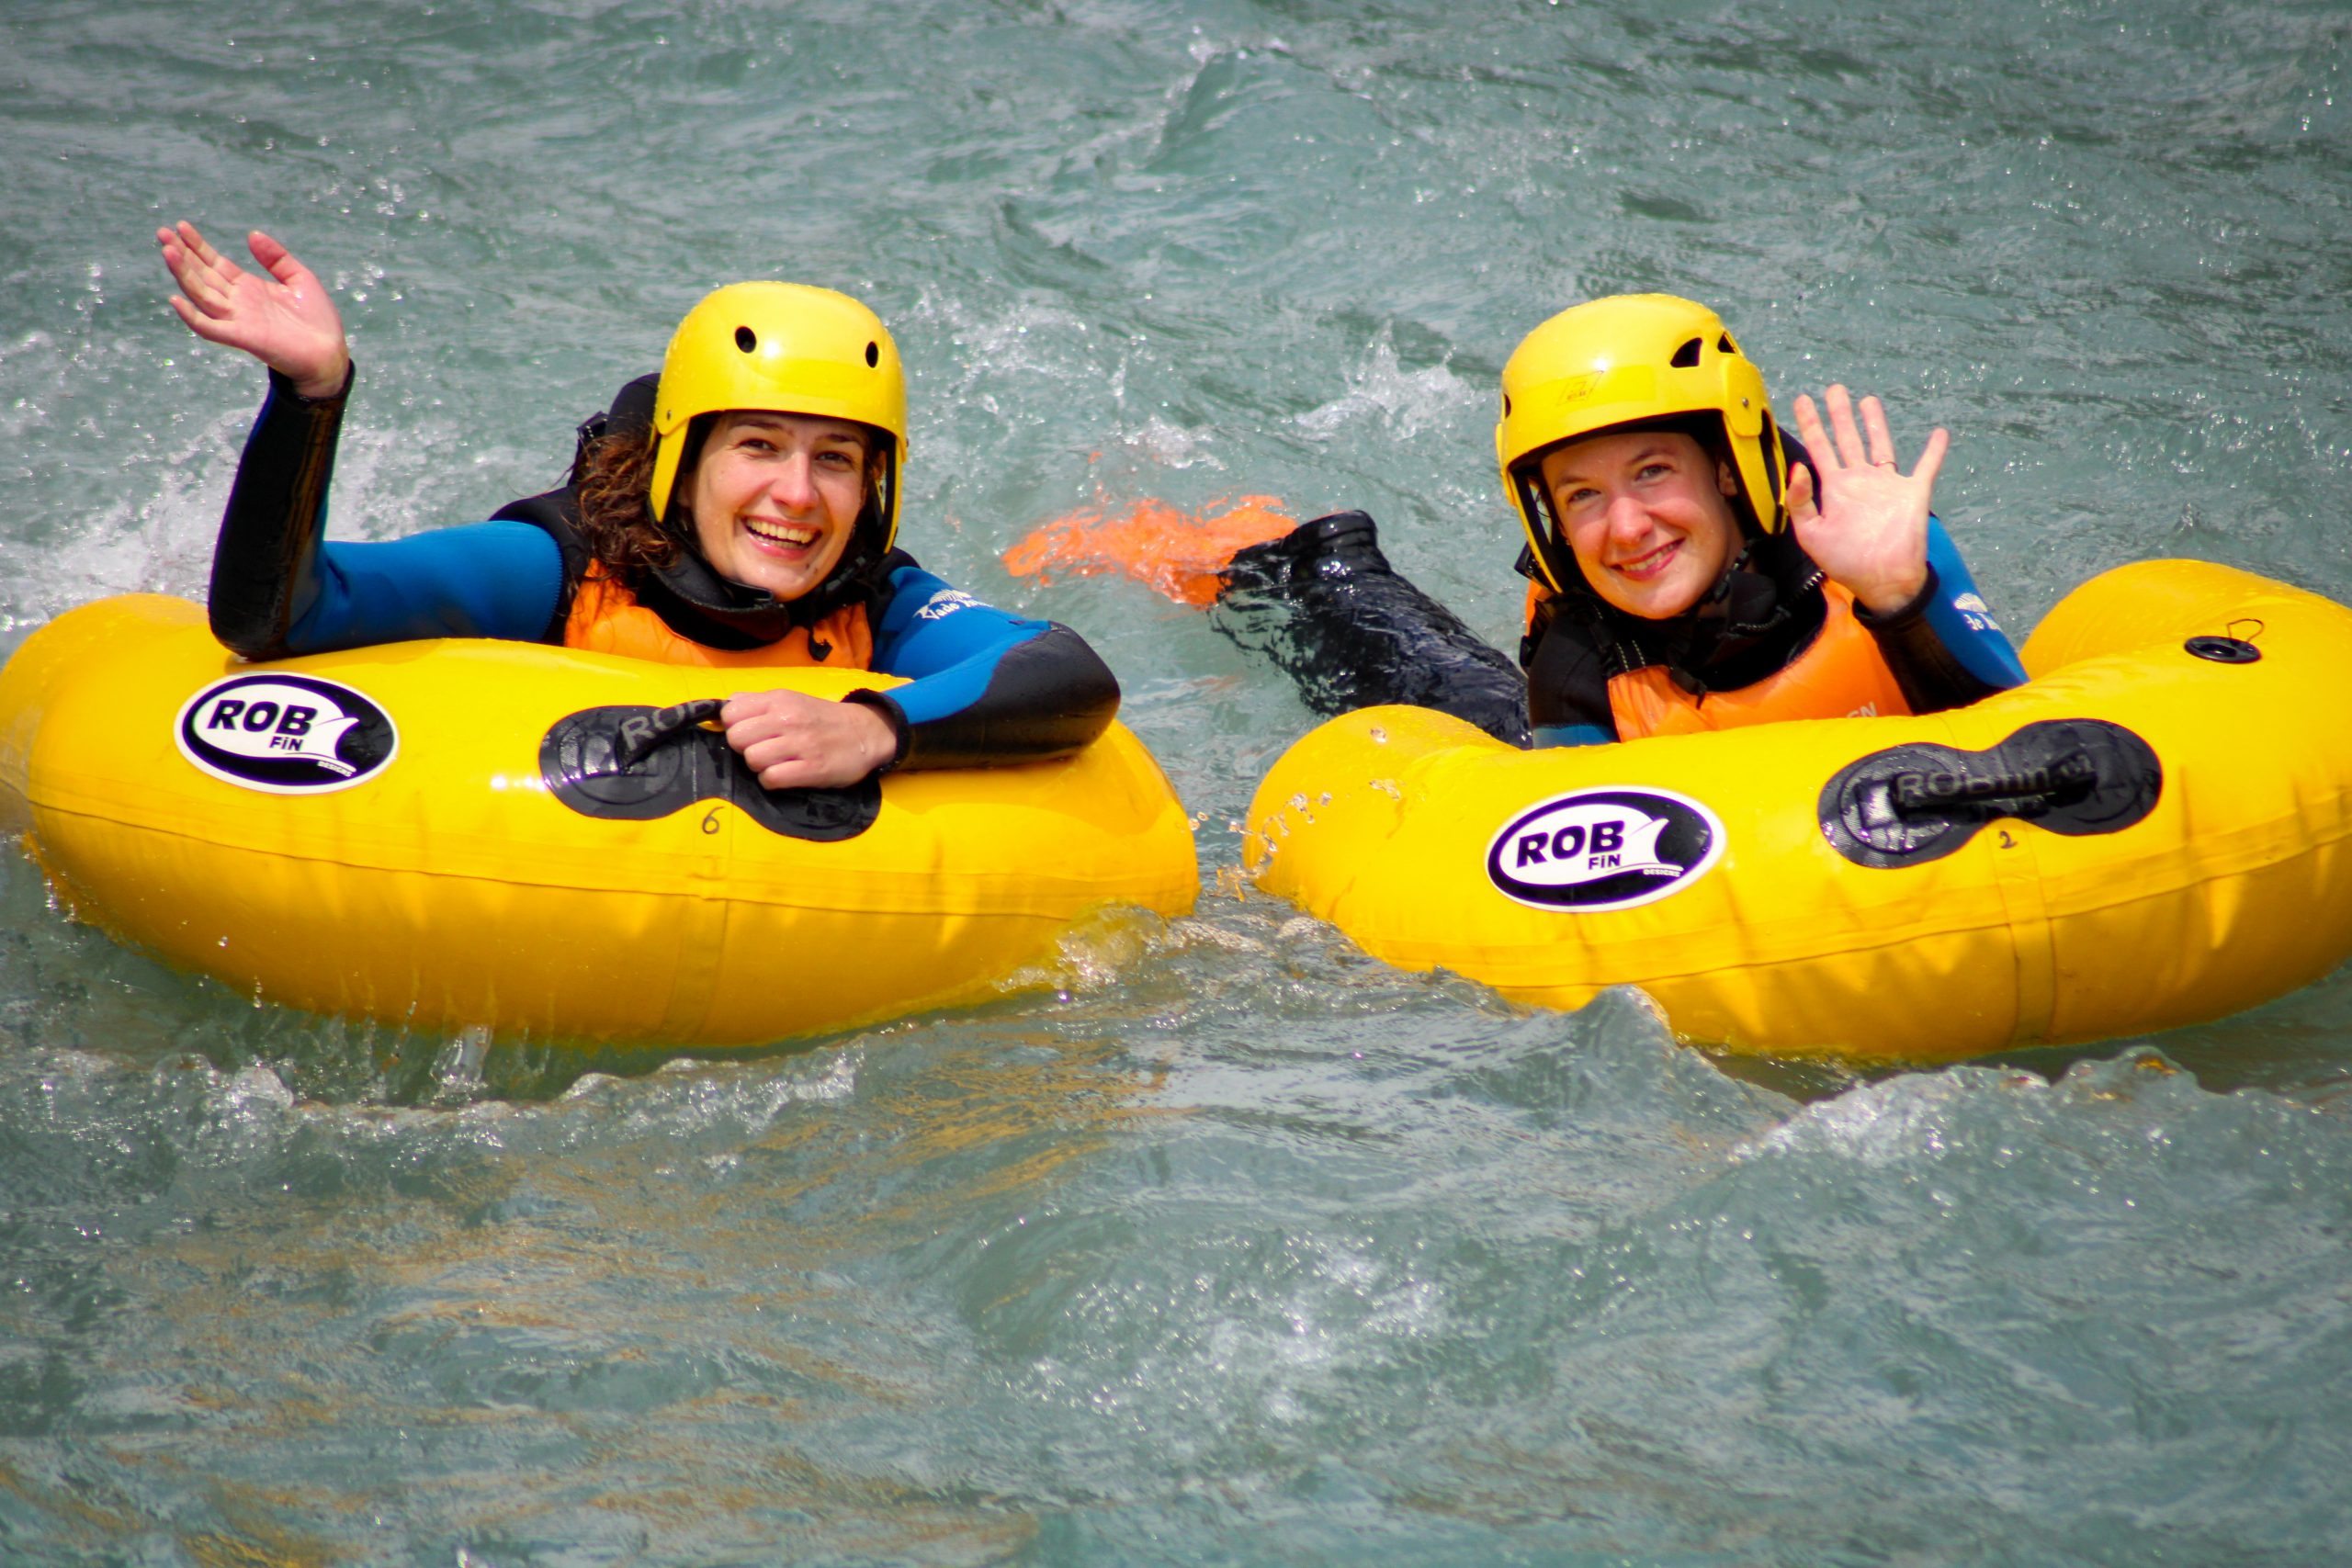 The girls on the river in hydrospeed, smiling.